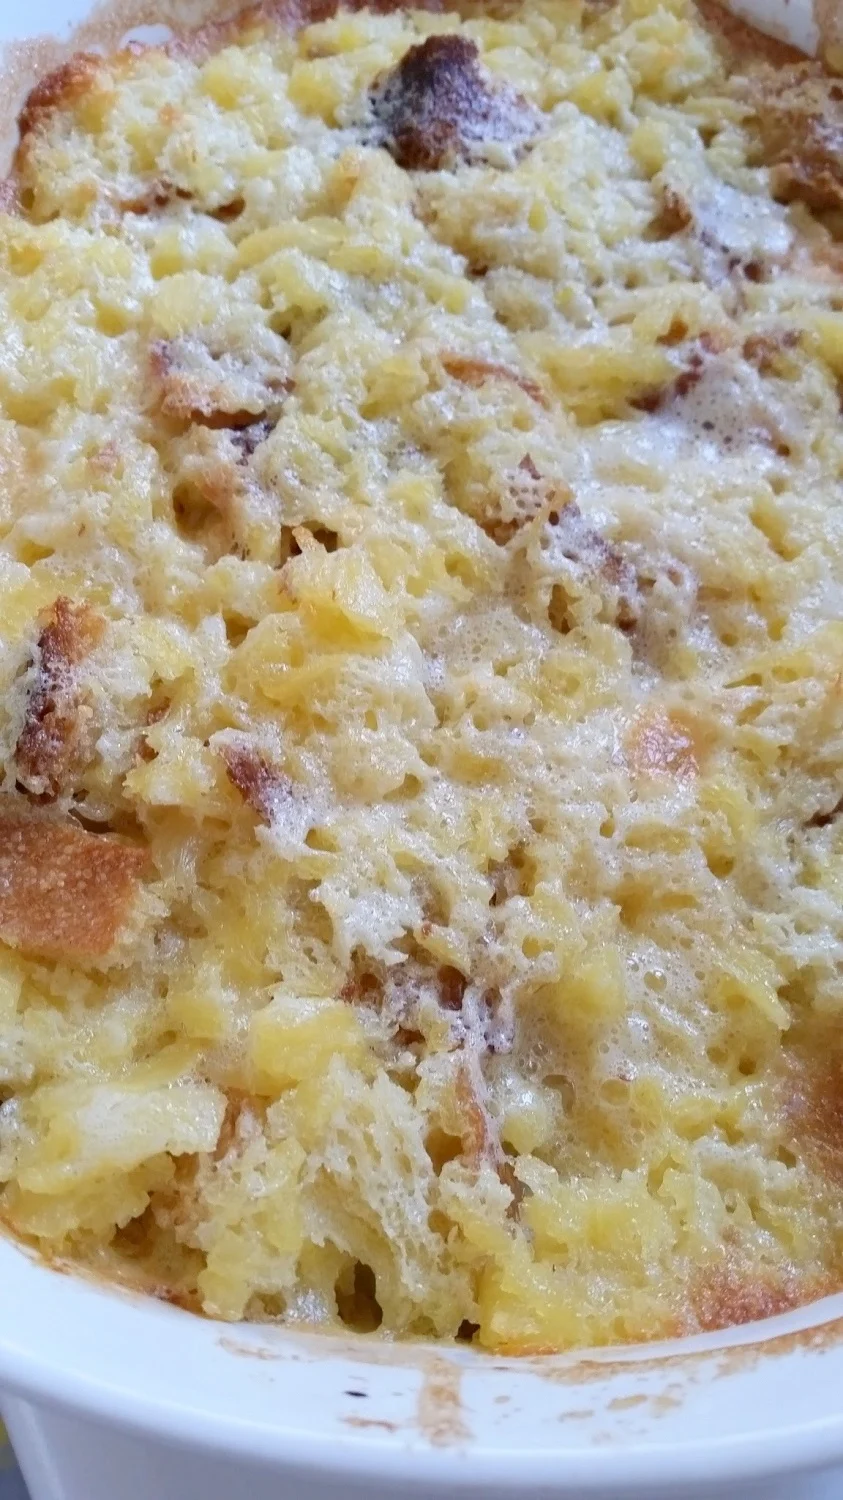 A very popular Pineapple Casserole with only 5 ingredients needed. It’s all you need to make this wonderful light and fluffy pineapple baked casserole! via @Mooreorlesscook